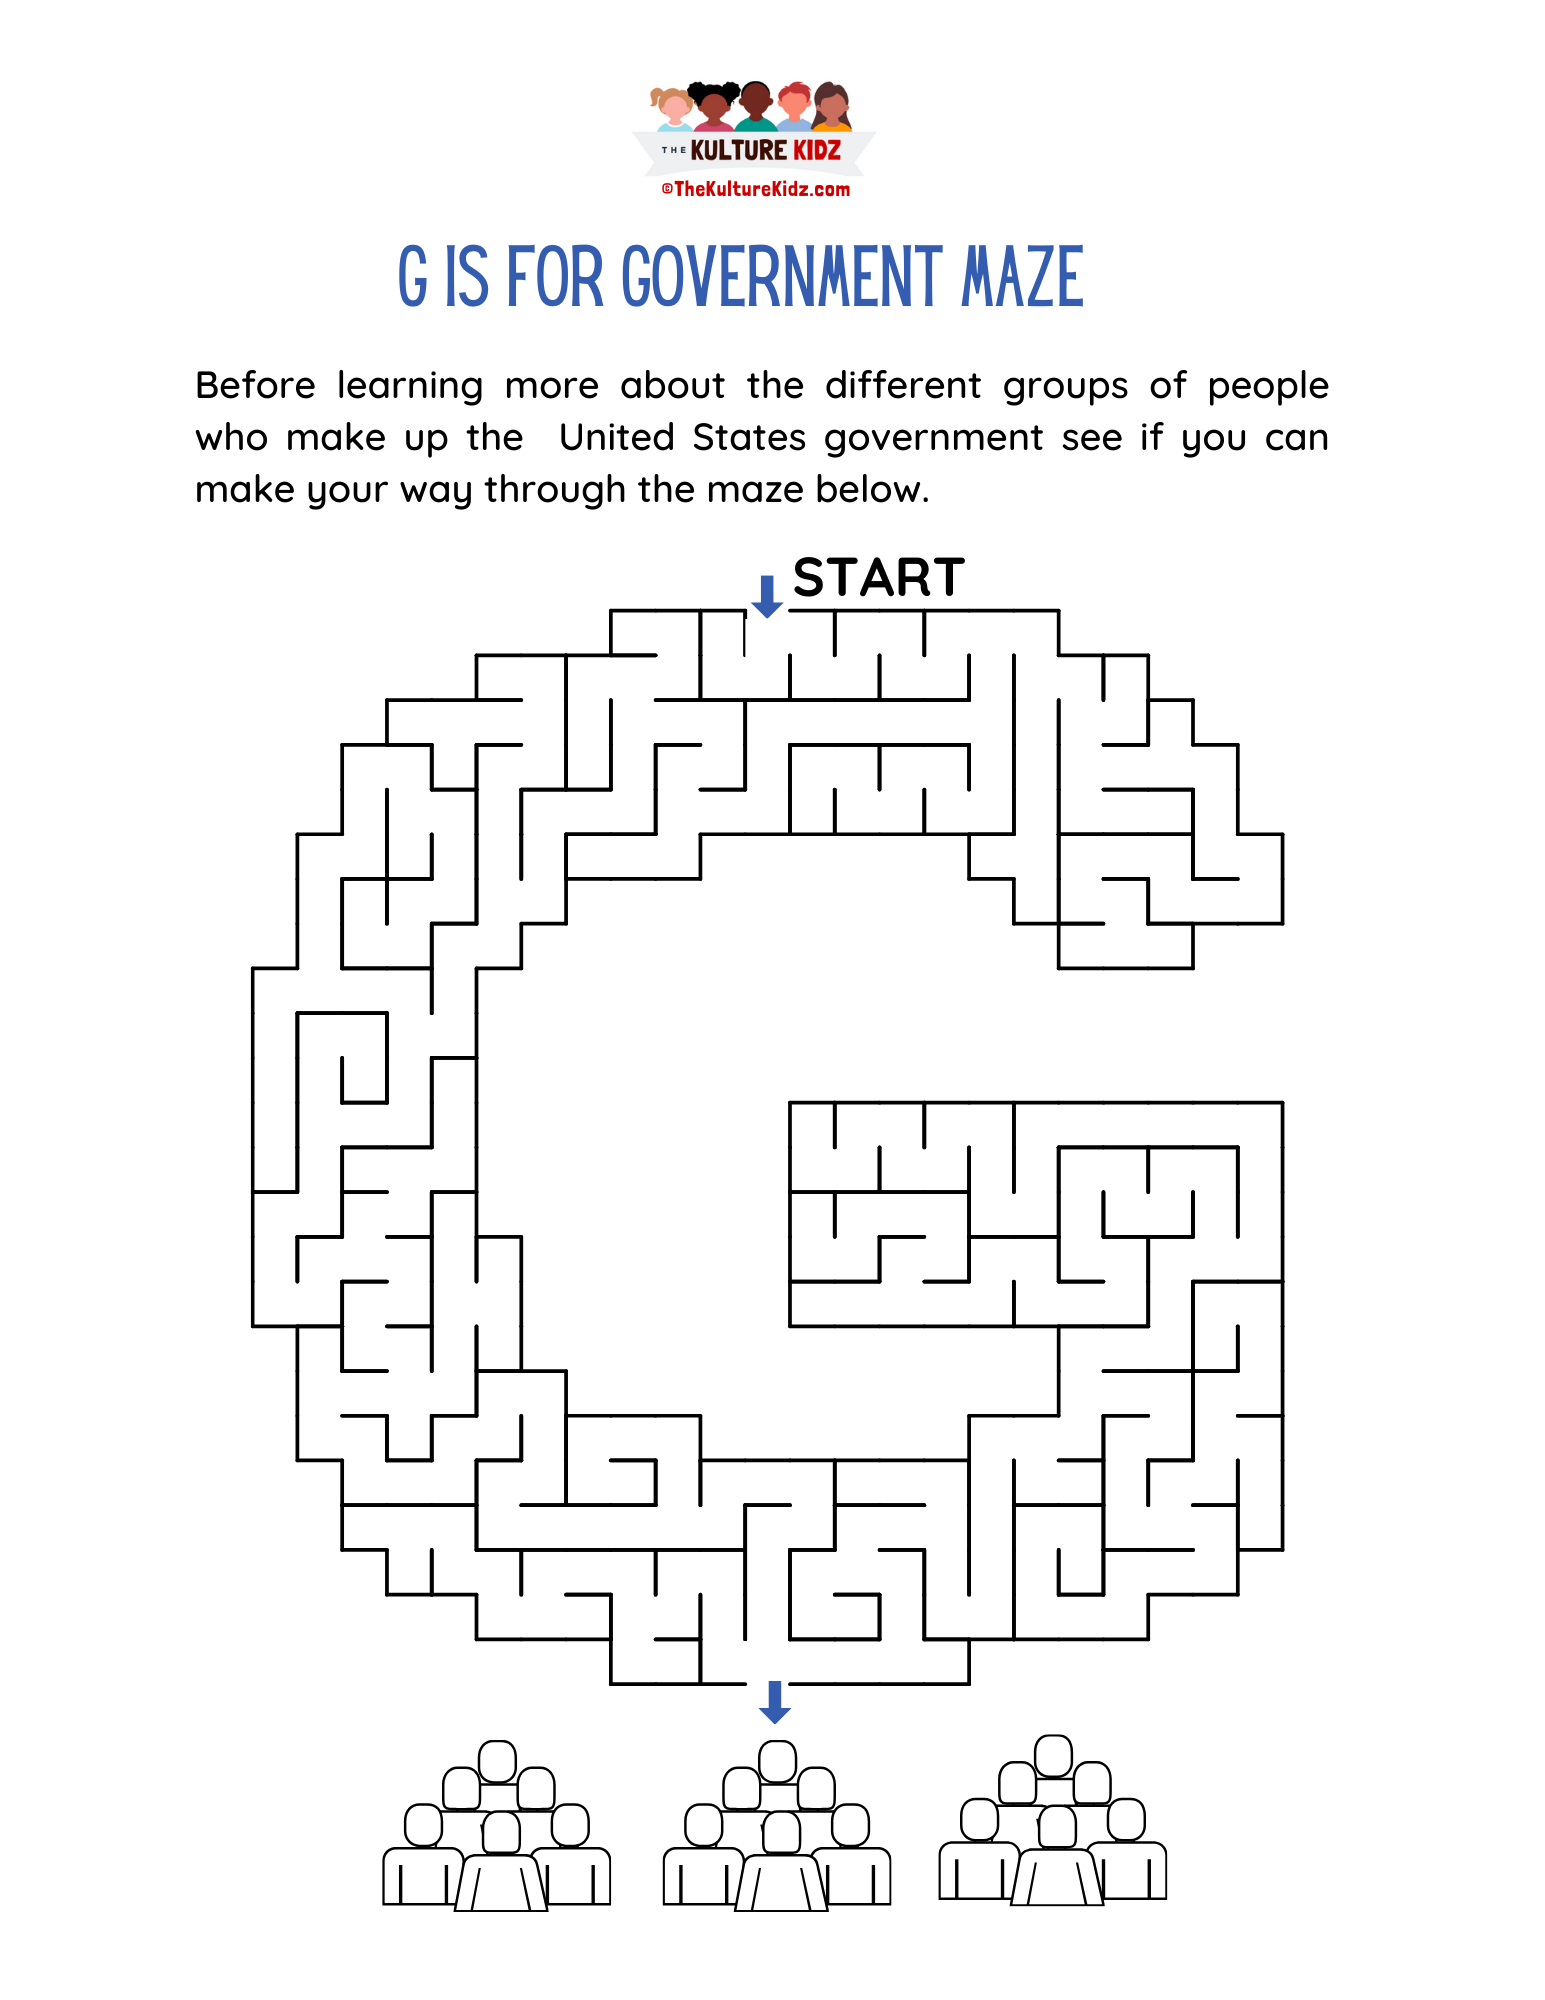 G is for Government Maze